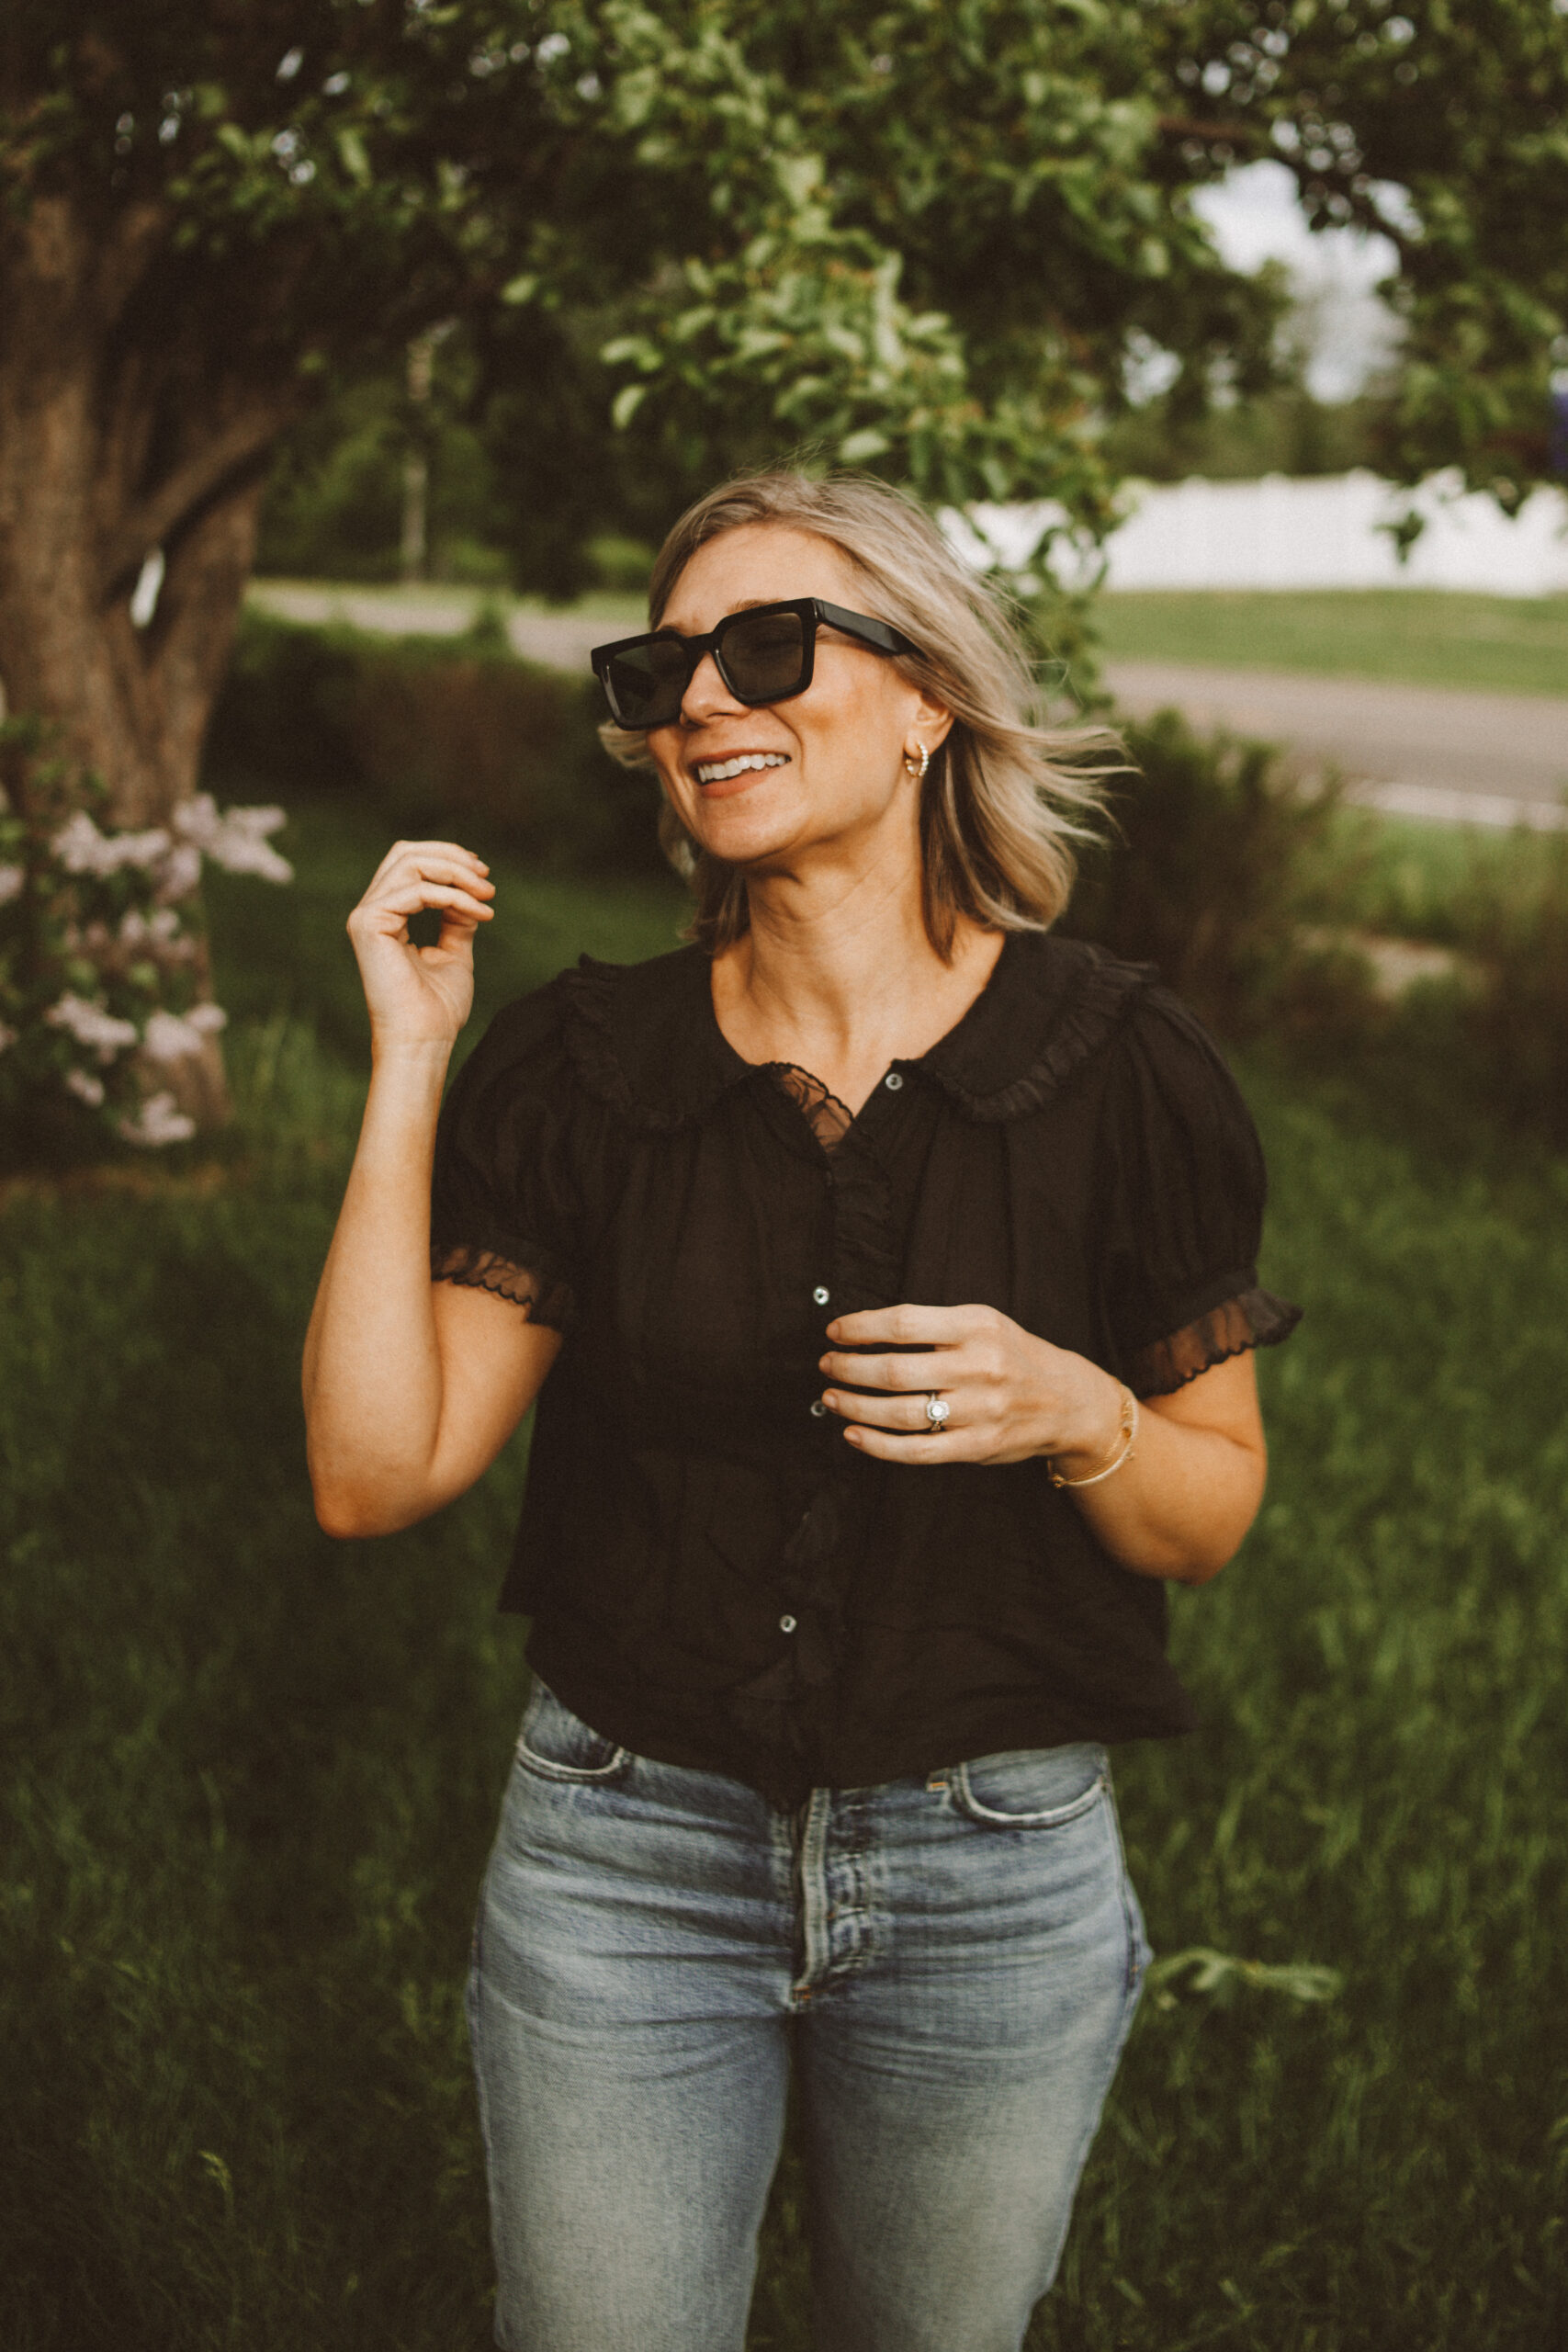 Karin Emily wears one of her favorite romantic blouses for summer with a pair of jeans, black sunglasses, and black sandals